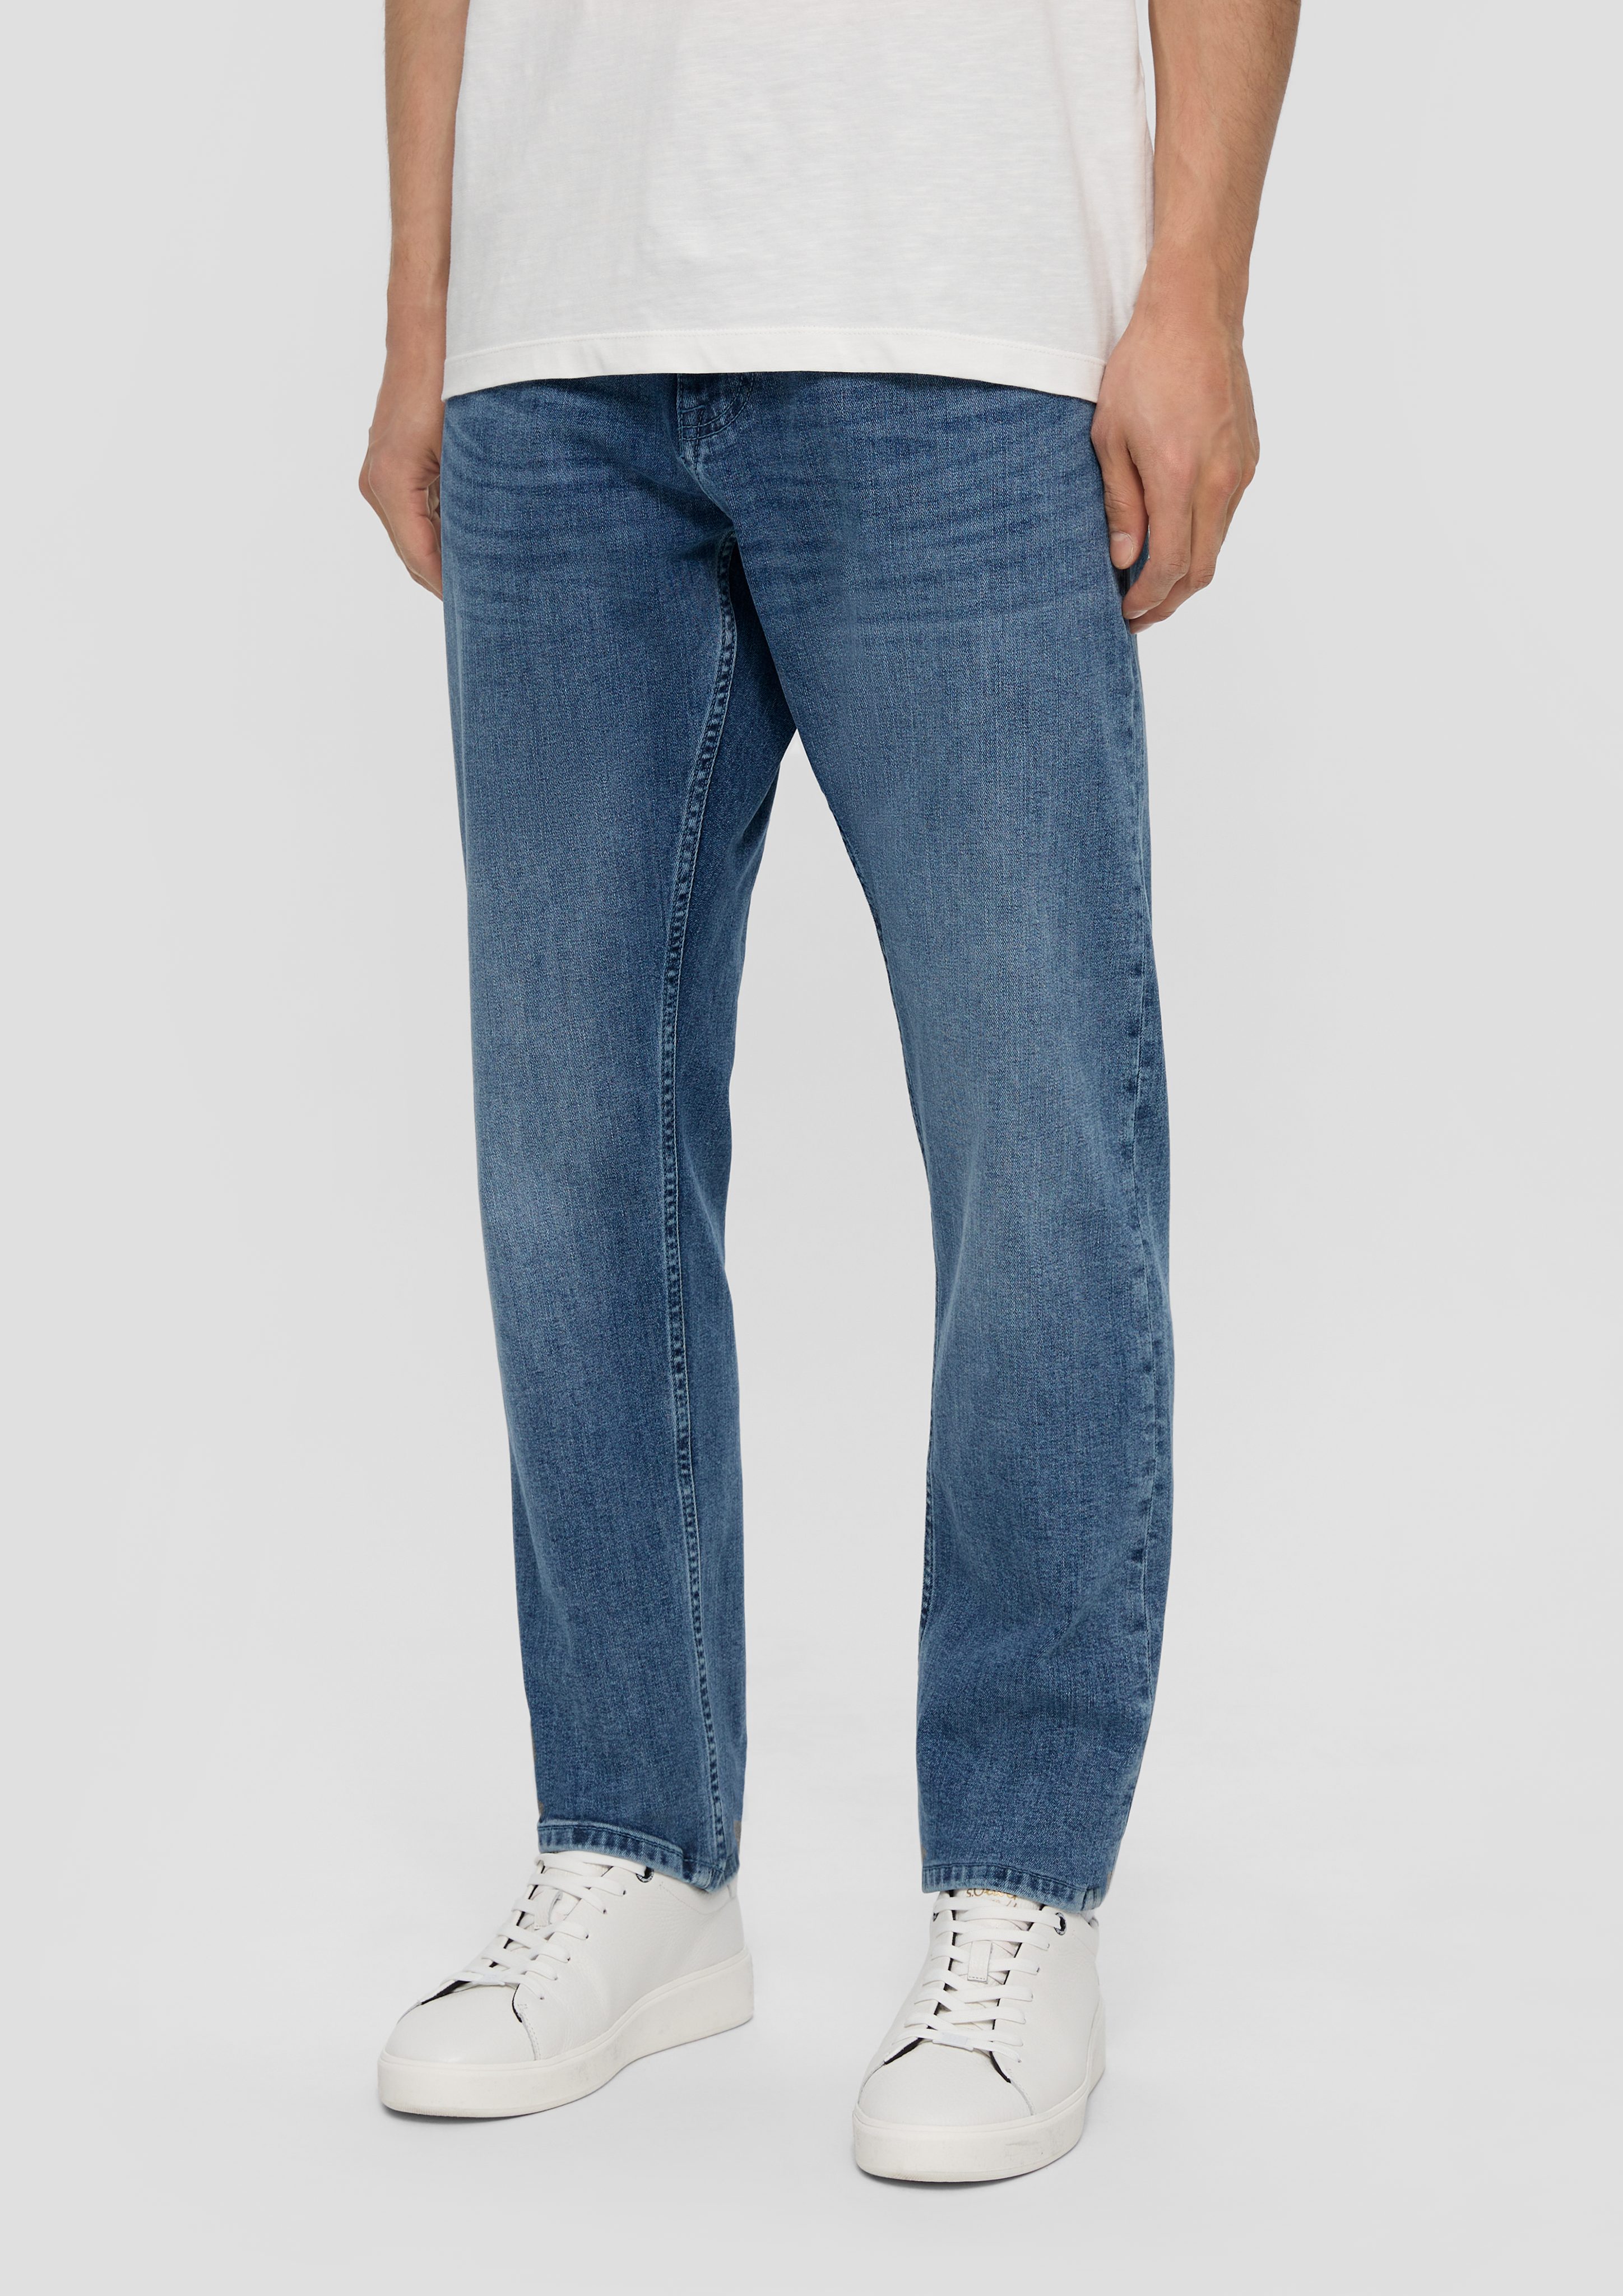 s.Oliver Stoffhose Jeans Mauro / Regular Fit / High Rise / Tapered Leg Label-Patch blau